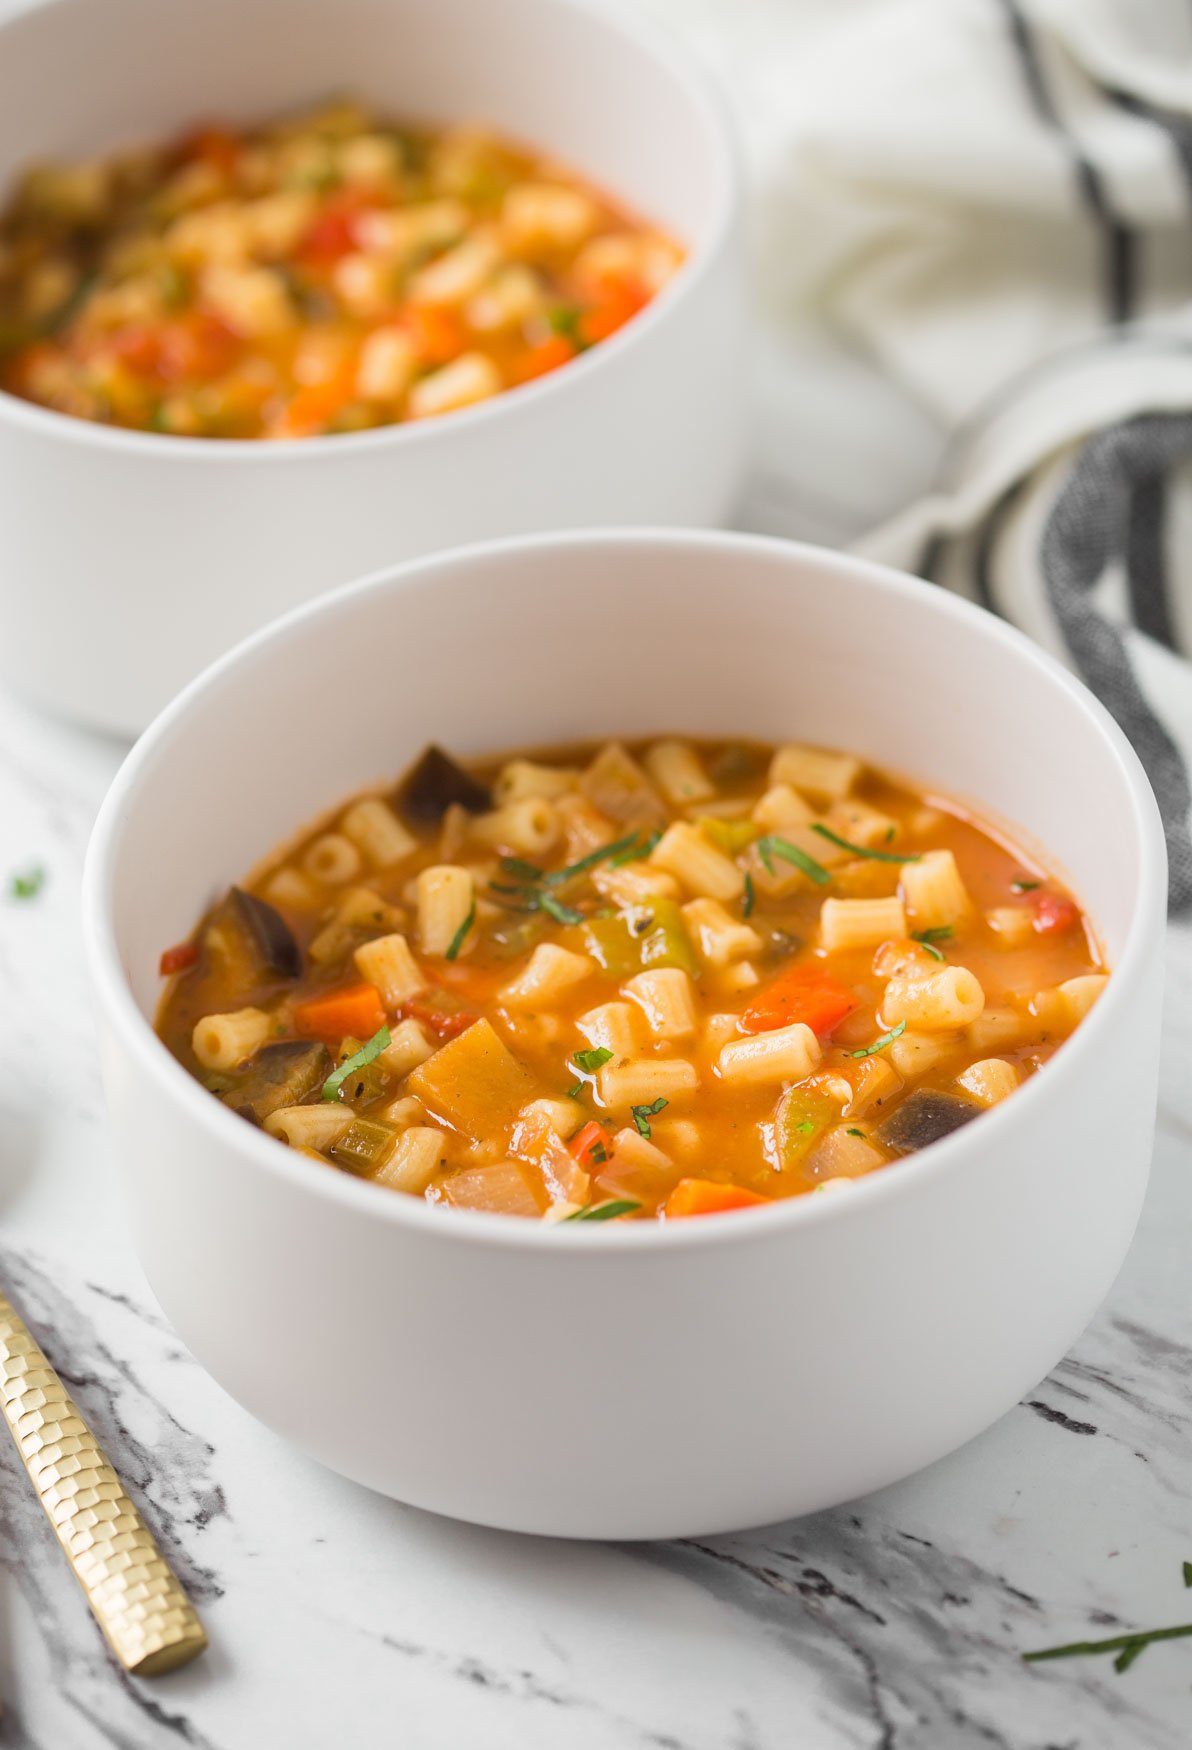  Easy vegetable pasta soup recipe - this fresh veggie and pasta all-in-one pot soup is perfect for healthy weeknight dinners/lunch.